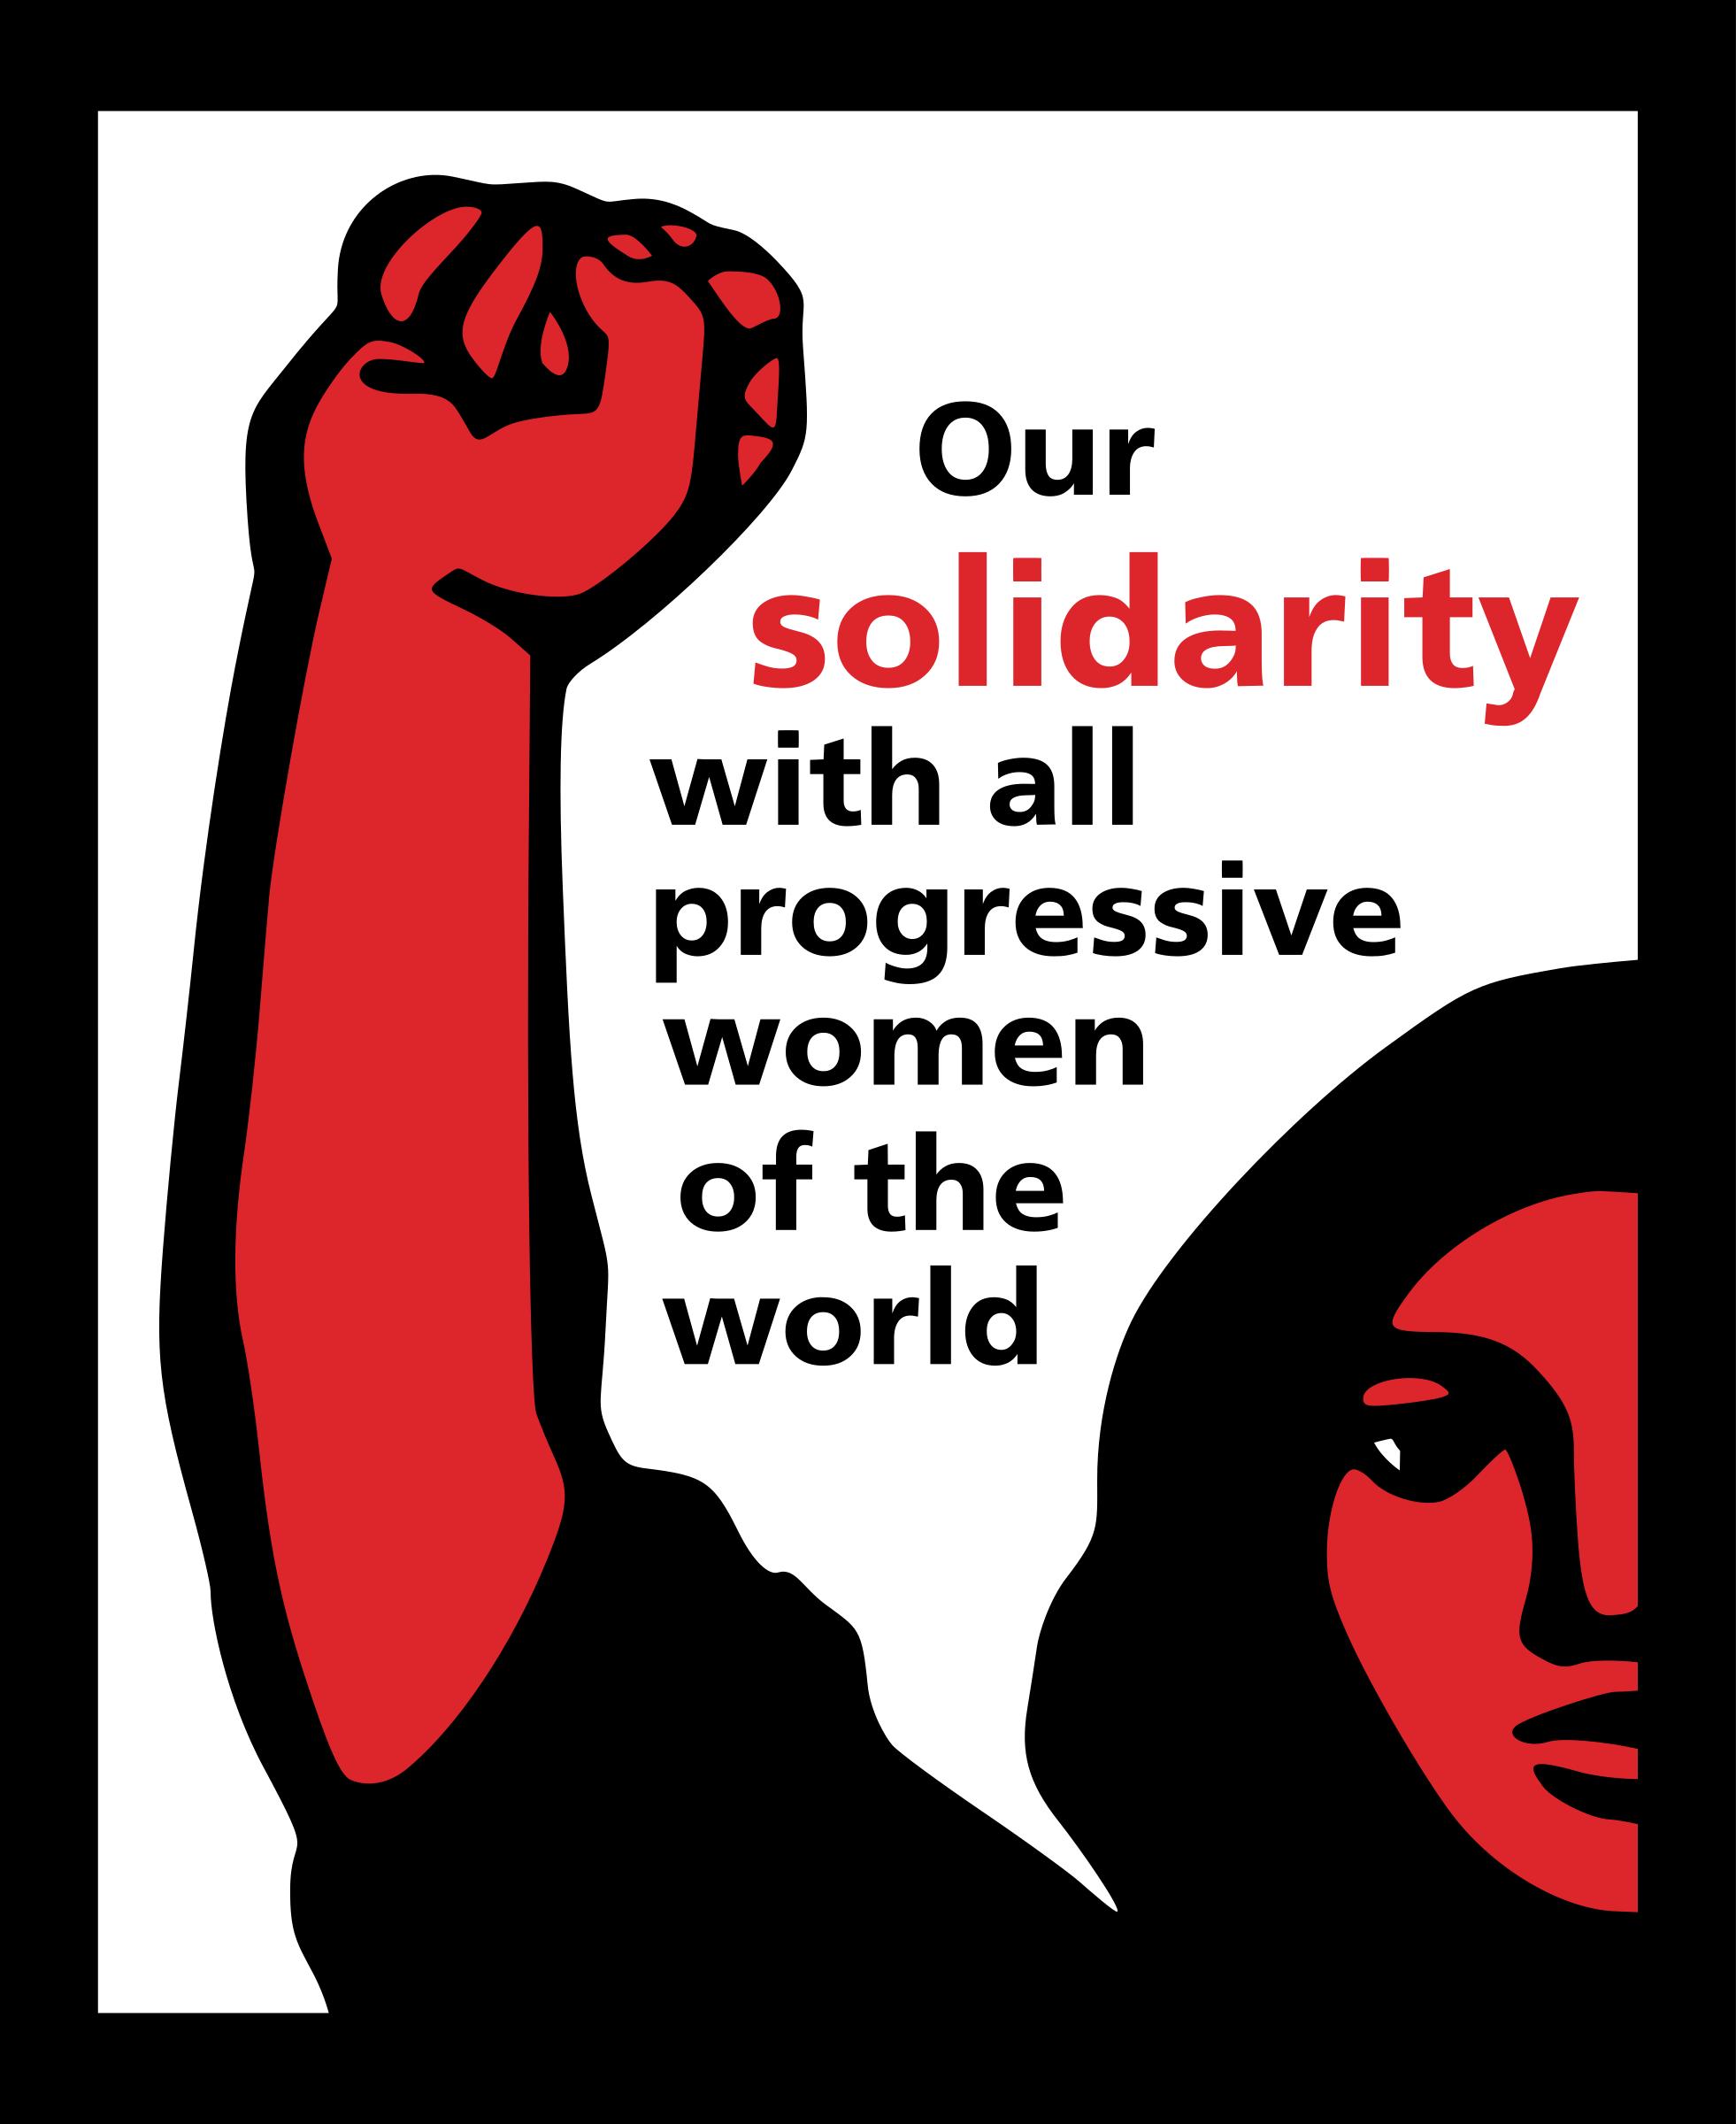 Our solidarity with all progressive women of the world png